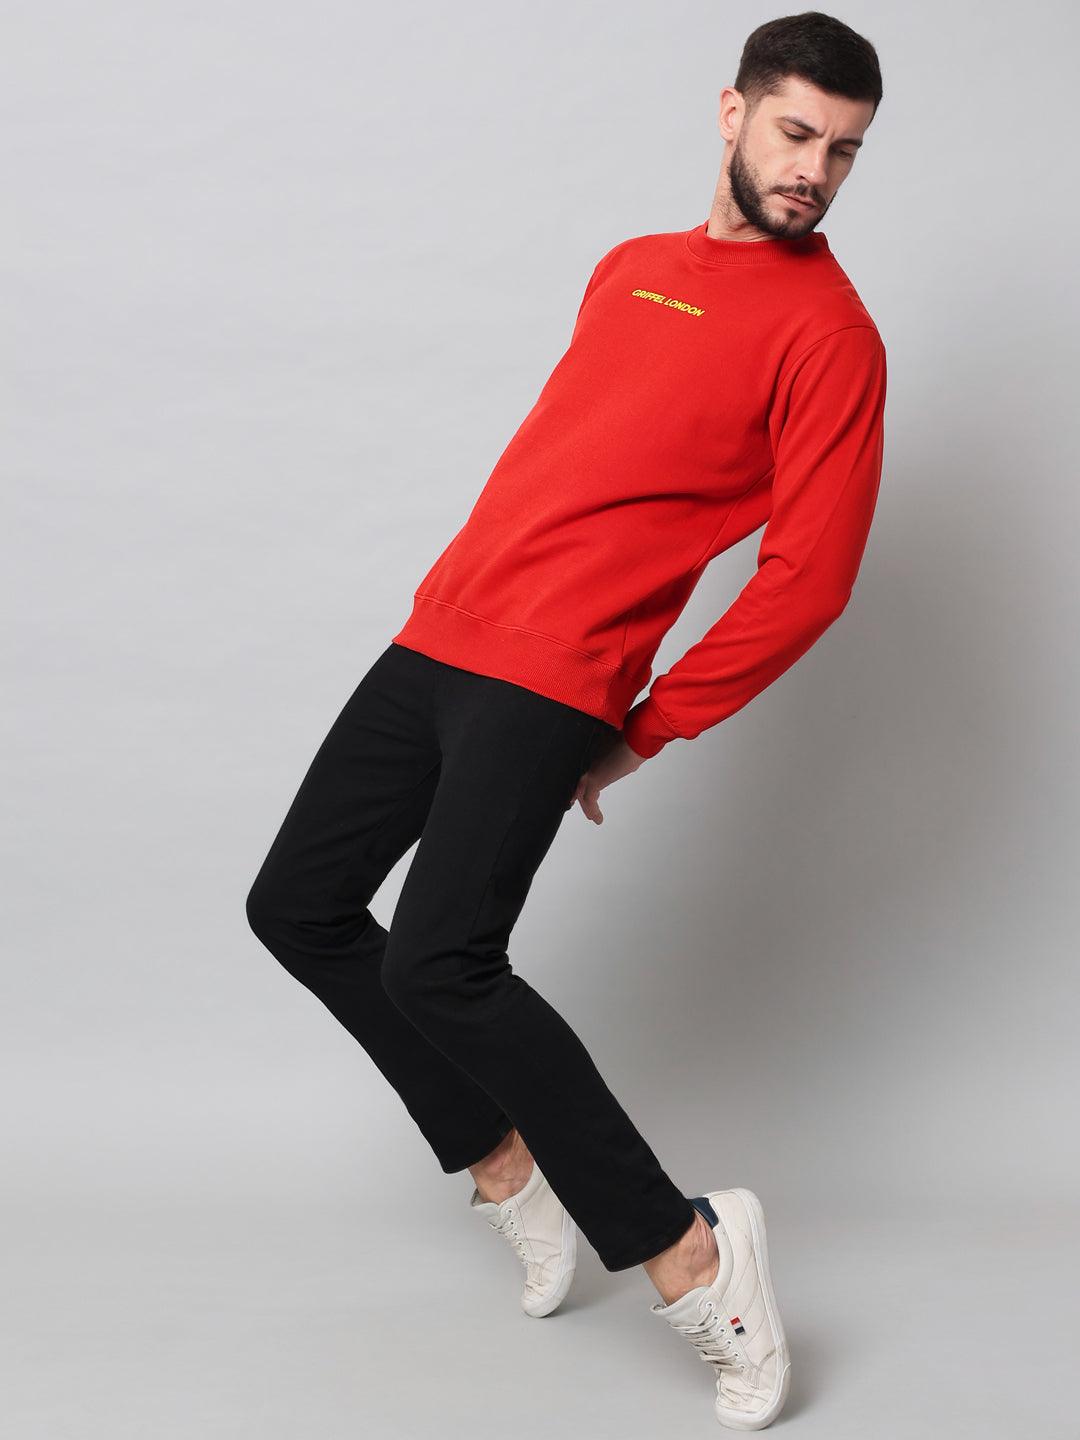 Griffel Men's Cotton Fleece Round Neck Red Sweatshirt with Full Sleeve and Front Logo Print - griffel